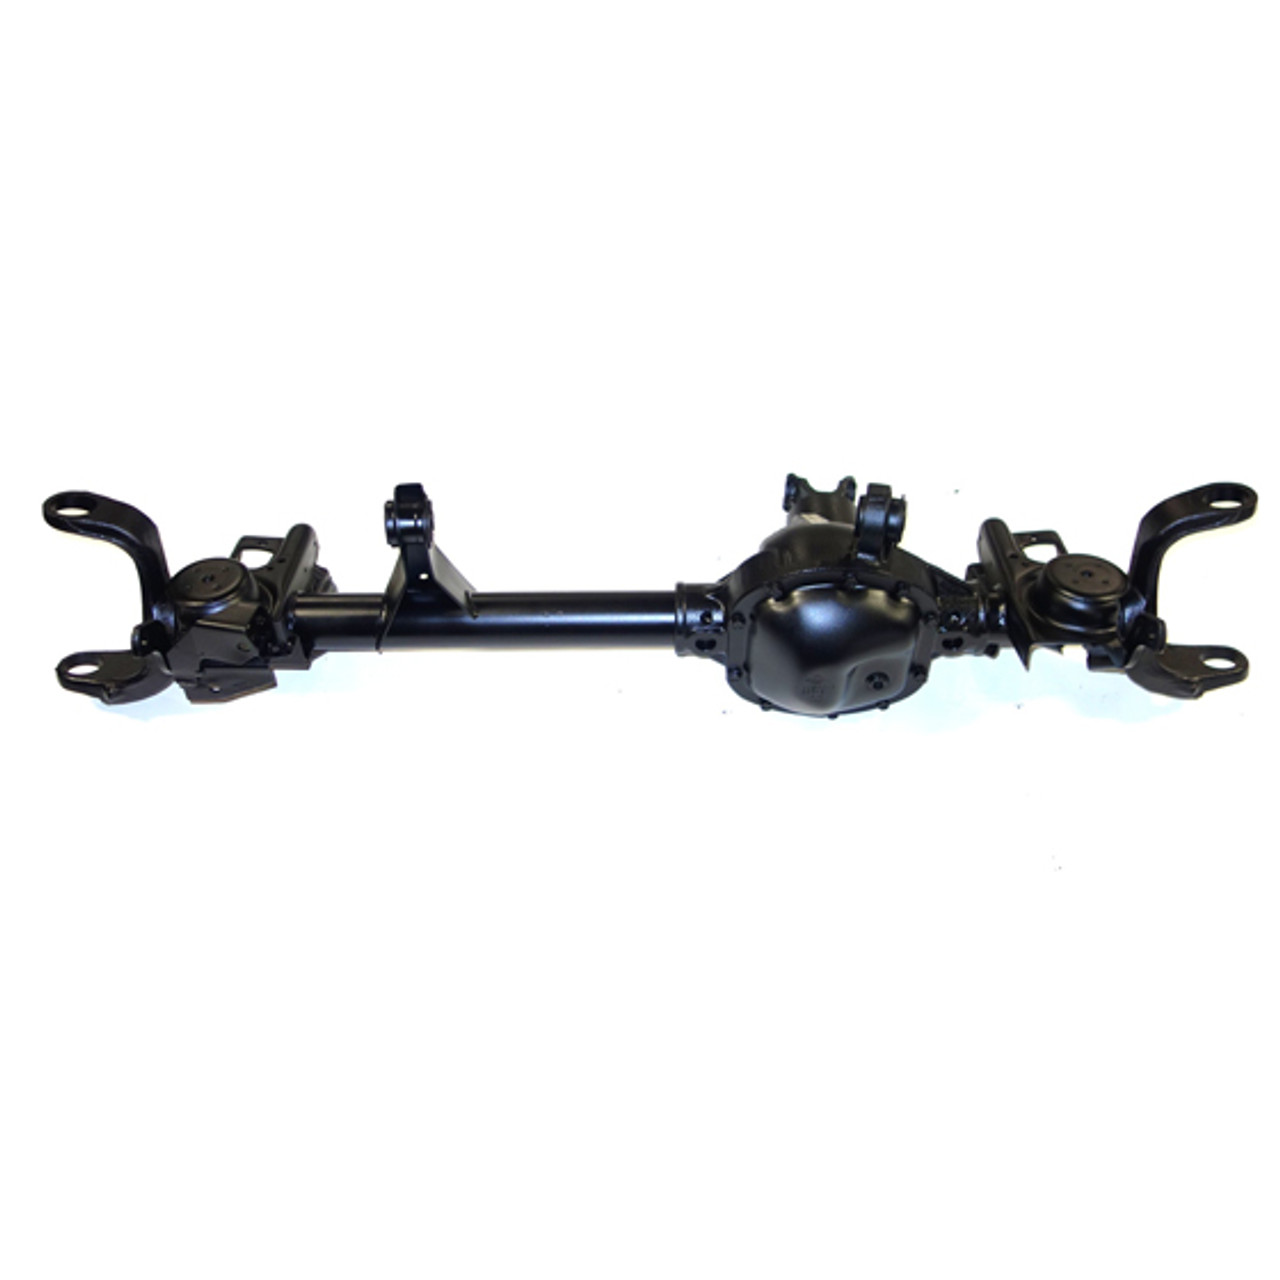 Reman Complete Axle Assembly for Dana 30 97-99 Jeep Wrangler 4.11 Ratio with ABS